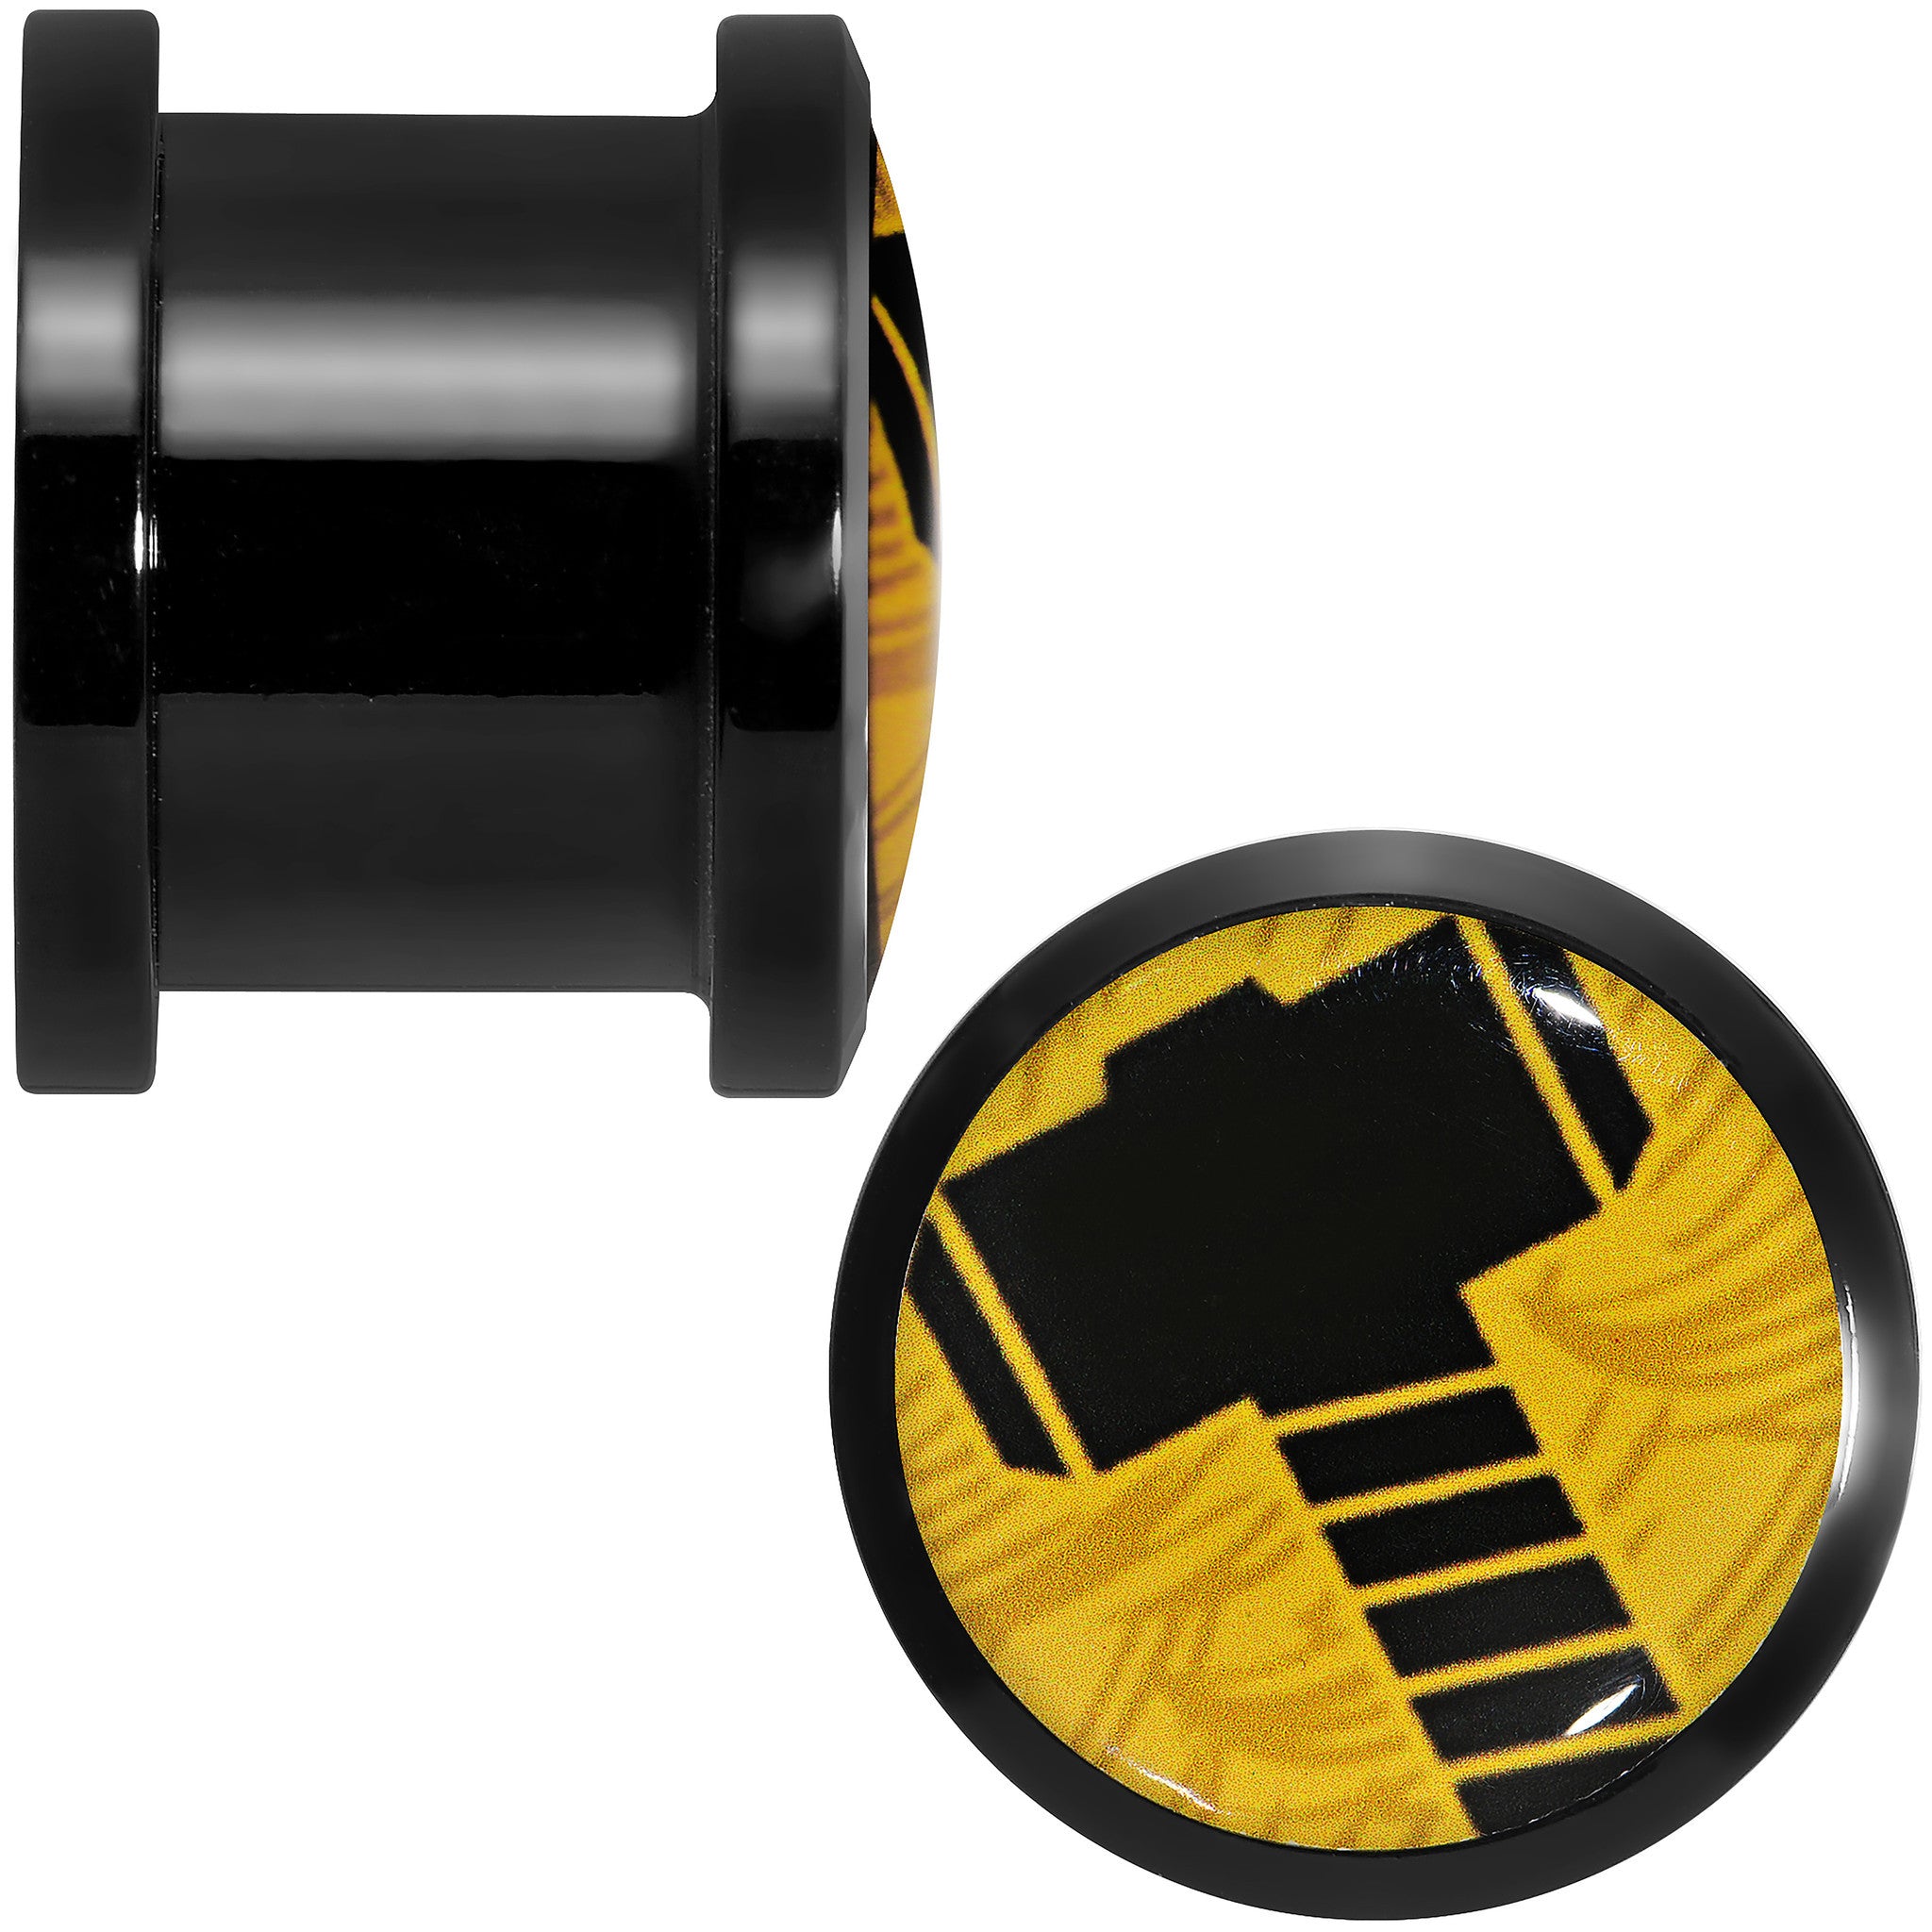 1/2 Licensed Hammer of Thor Acrylic Screw Fit Plugs Set